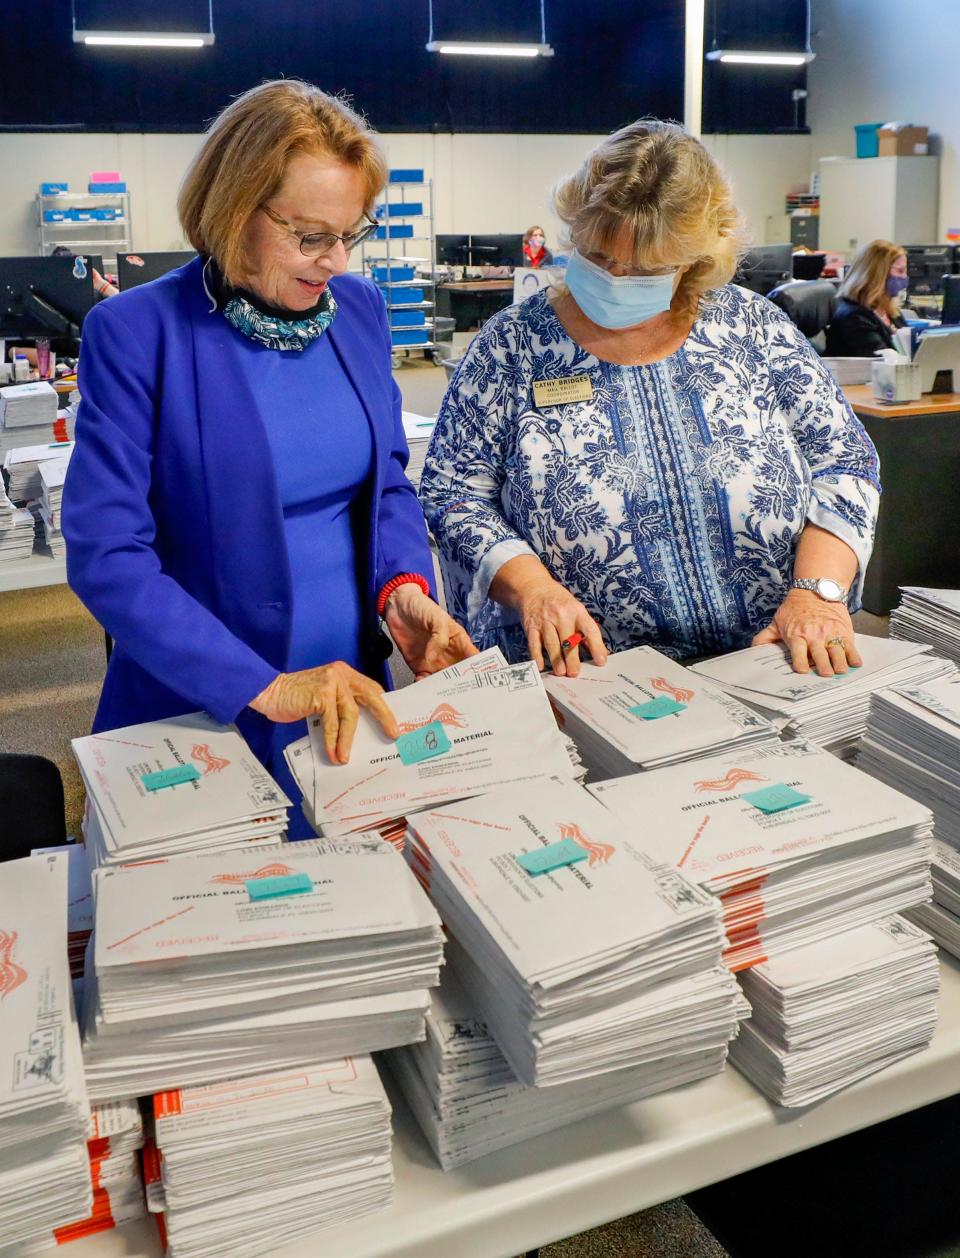 (L-R) Lori Edwards, Supervisor of Elections, and Cathy Bridges, mail ballot coordinator, with some of the mail in ballots that have already arrived at the Polk County Supervisor of Elections facility in Winter Haven, Florida  October 8, 2020.       